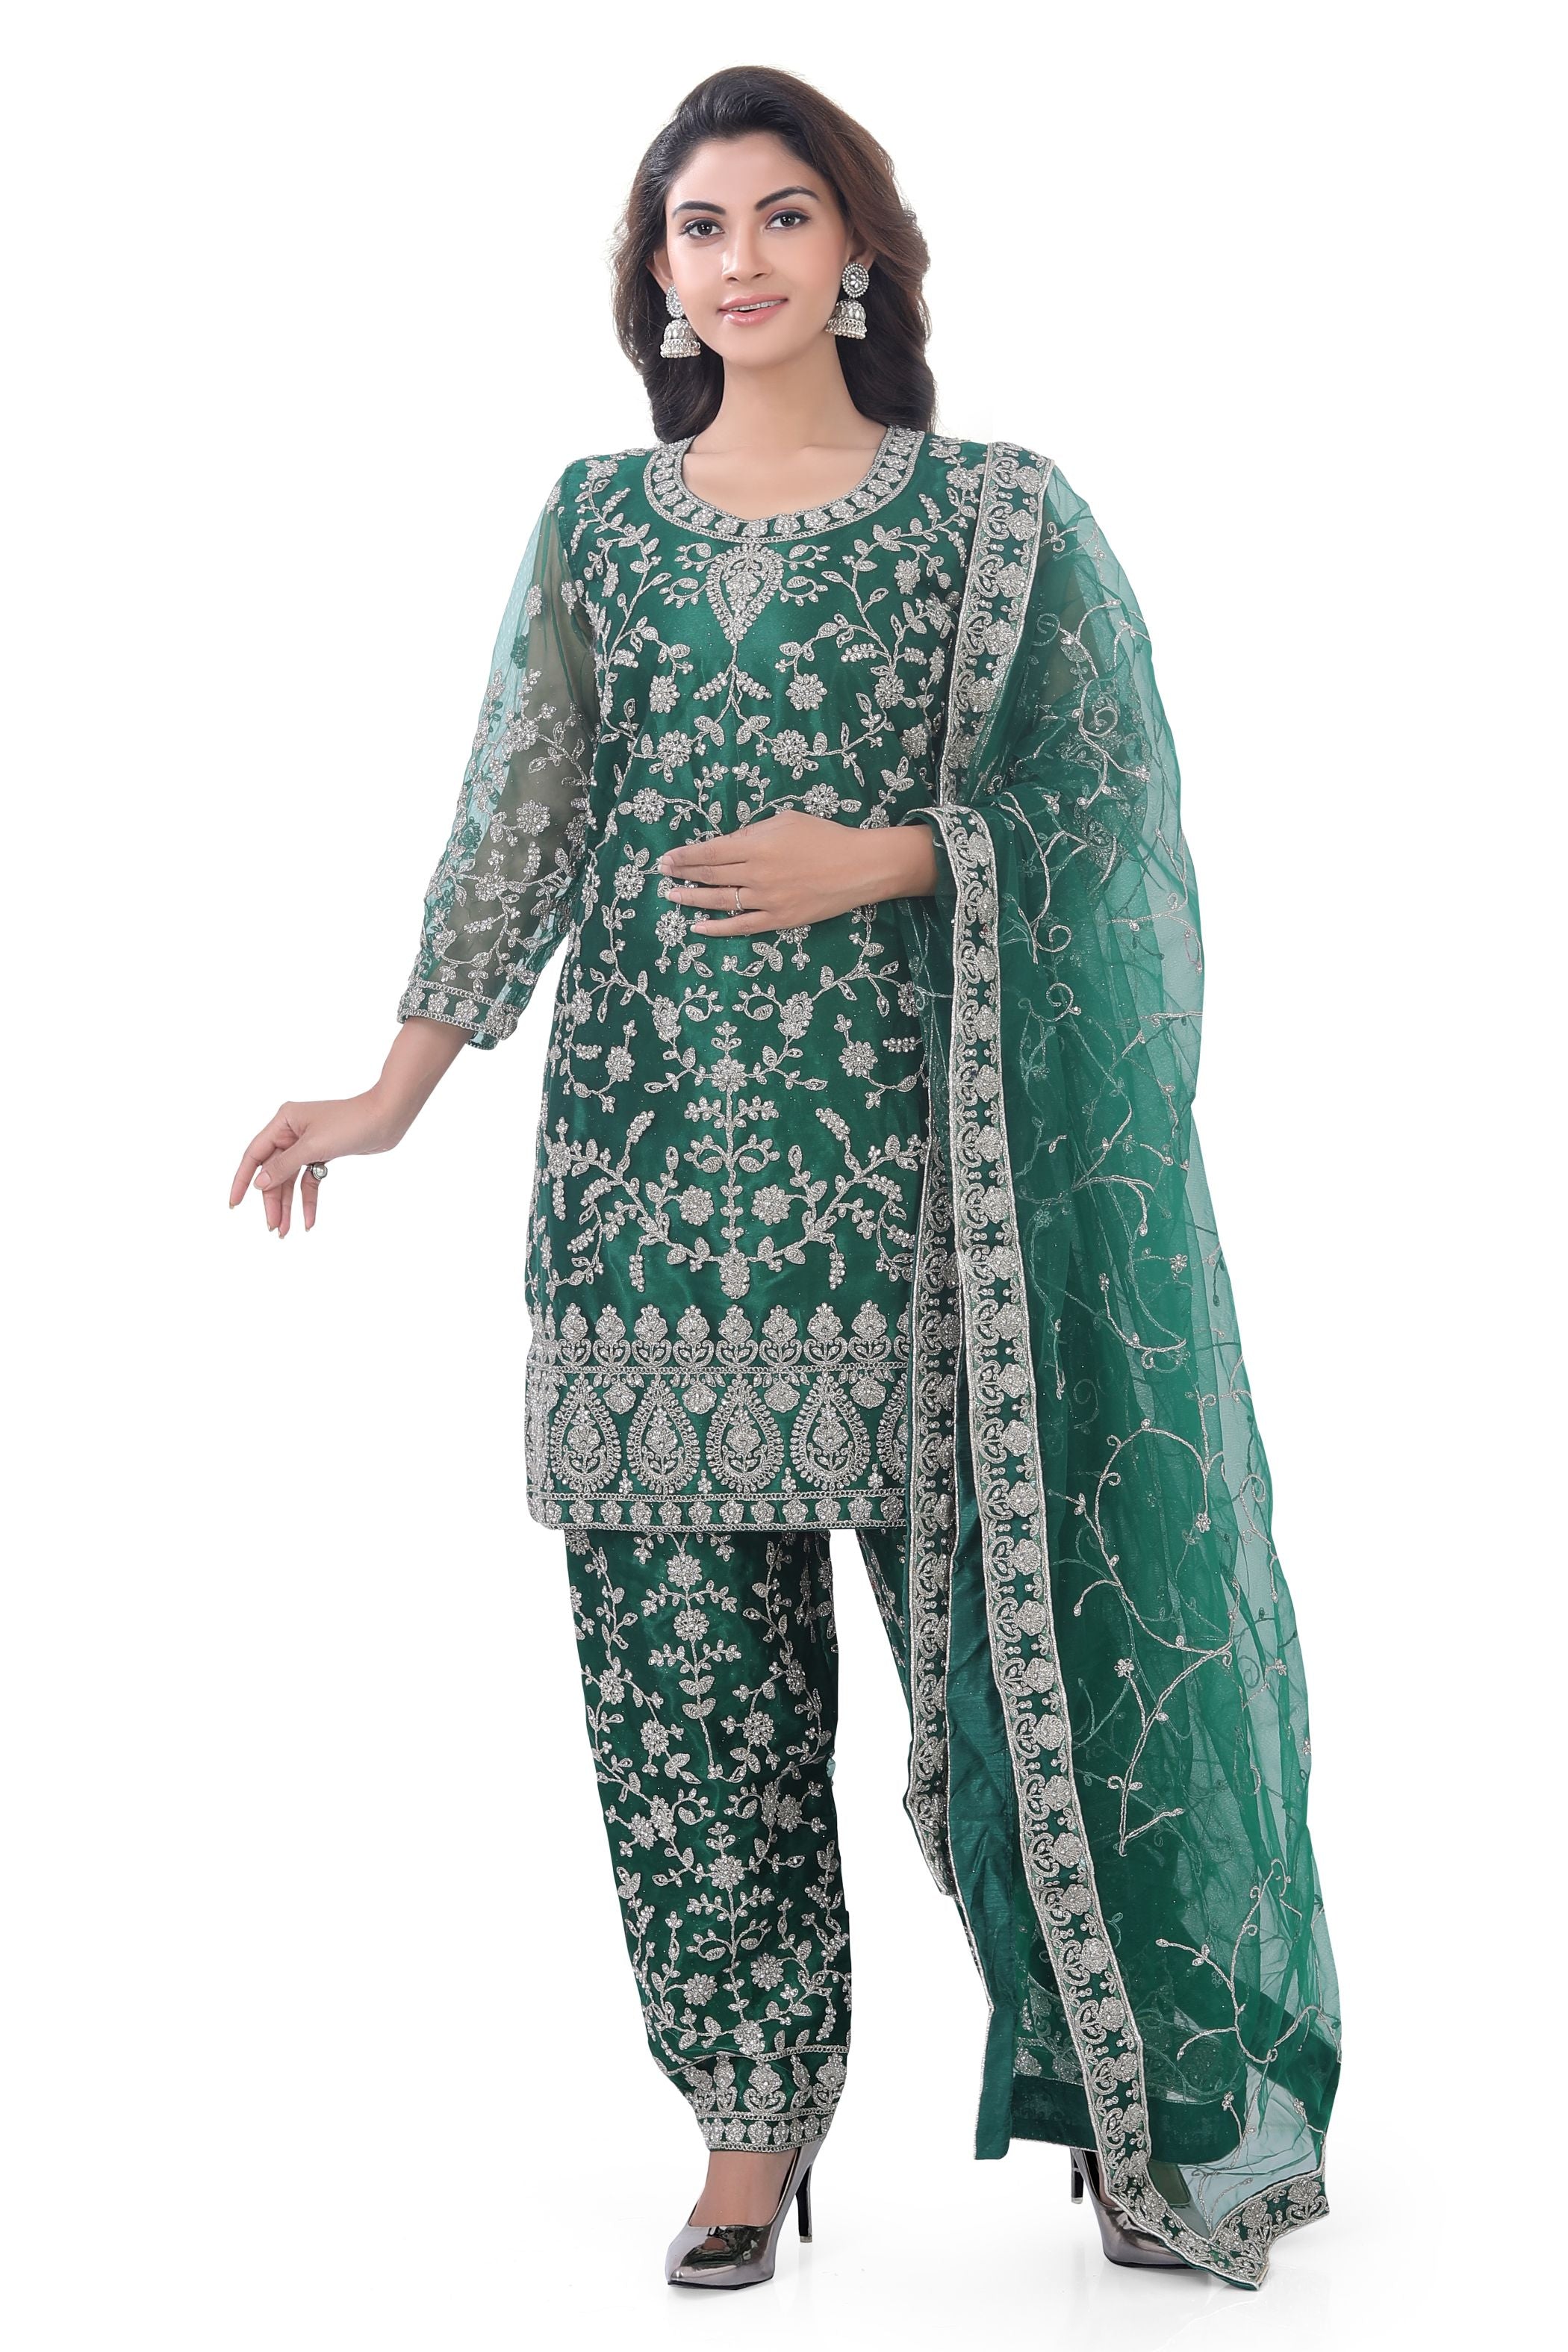 Heavy Embroidered Short Anarkali with Pencil Pant in Bottle Green Colour D.No.1